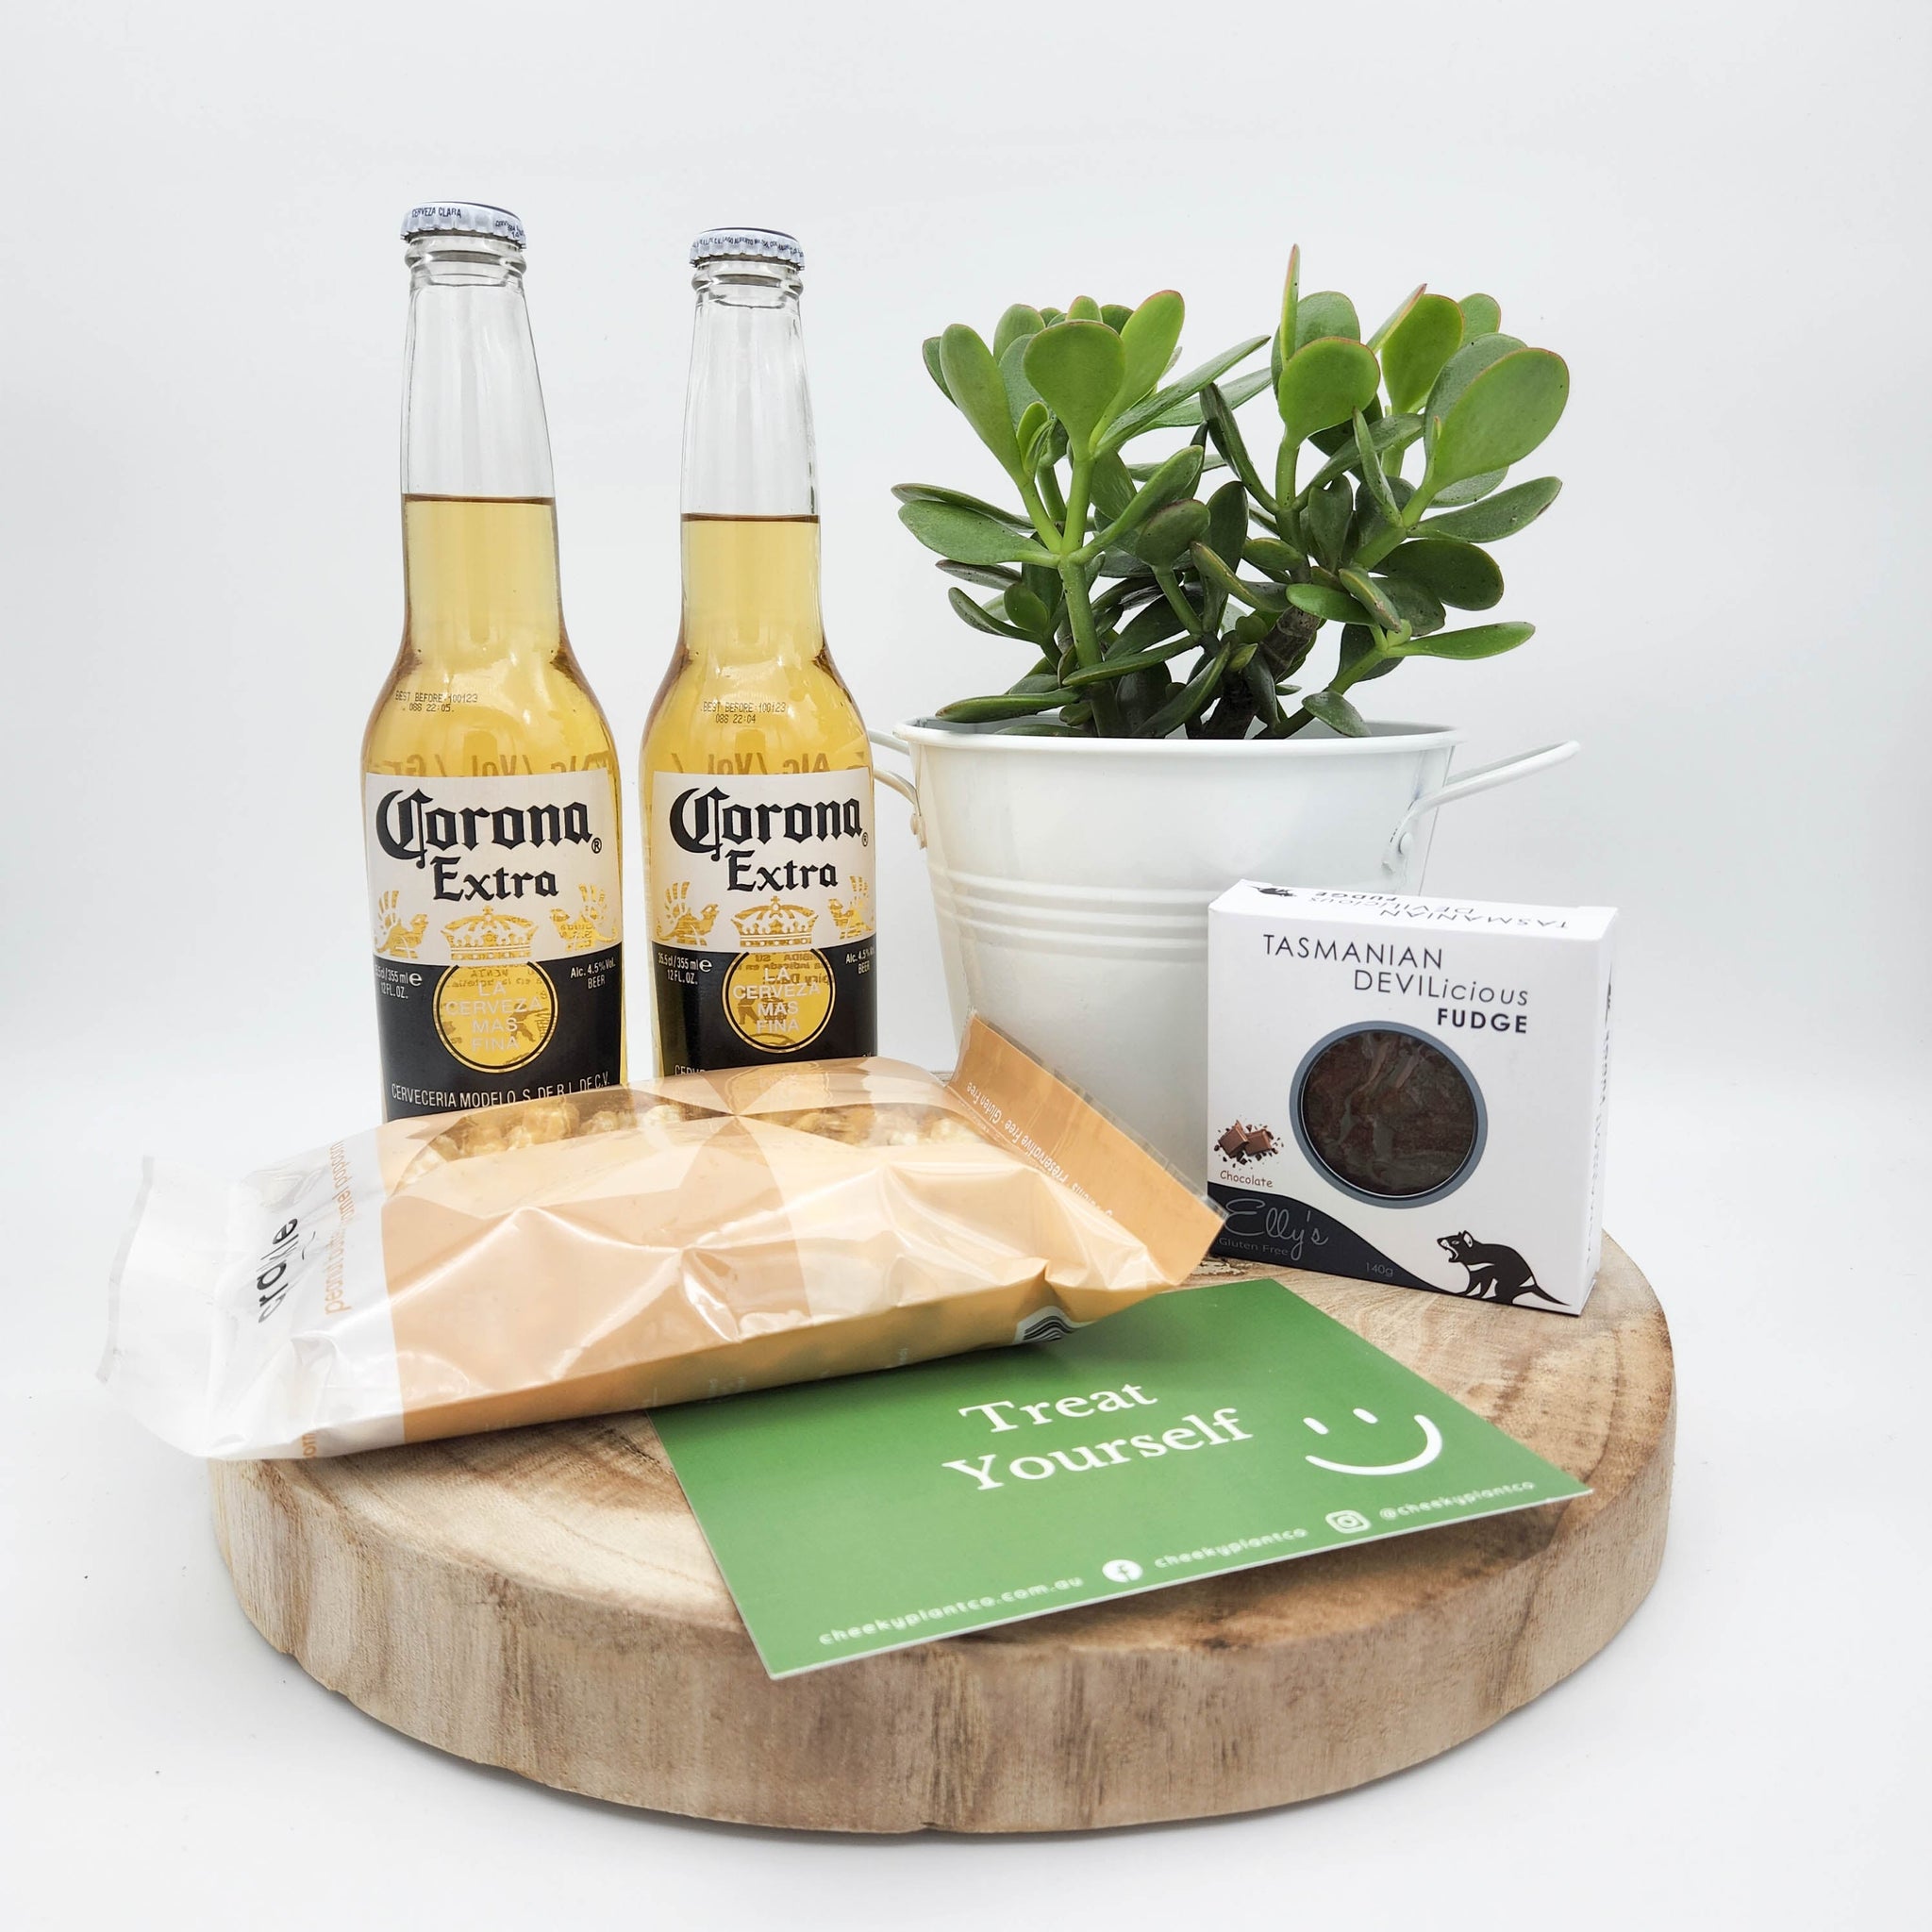 Beer Gifts | Great Gift Ideas for Men with Next Day Delivery